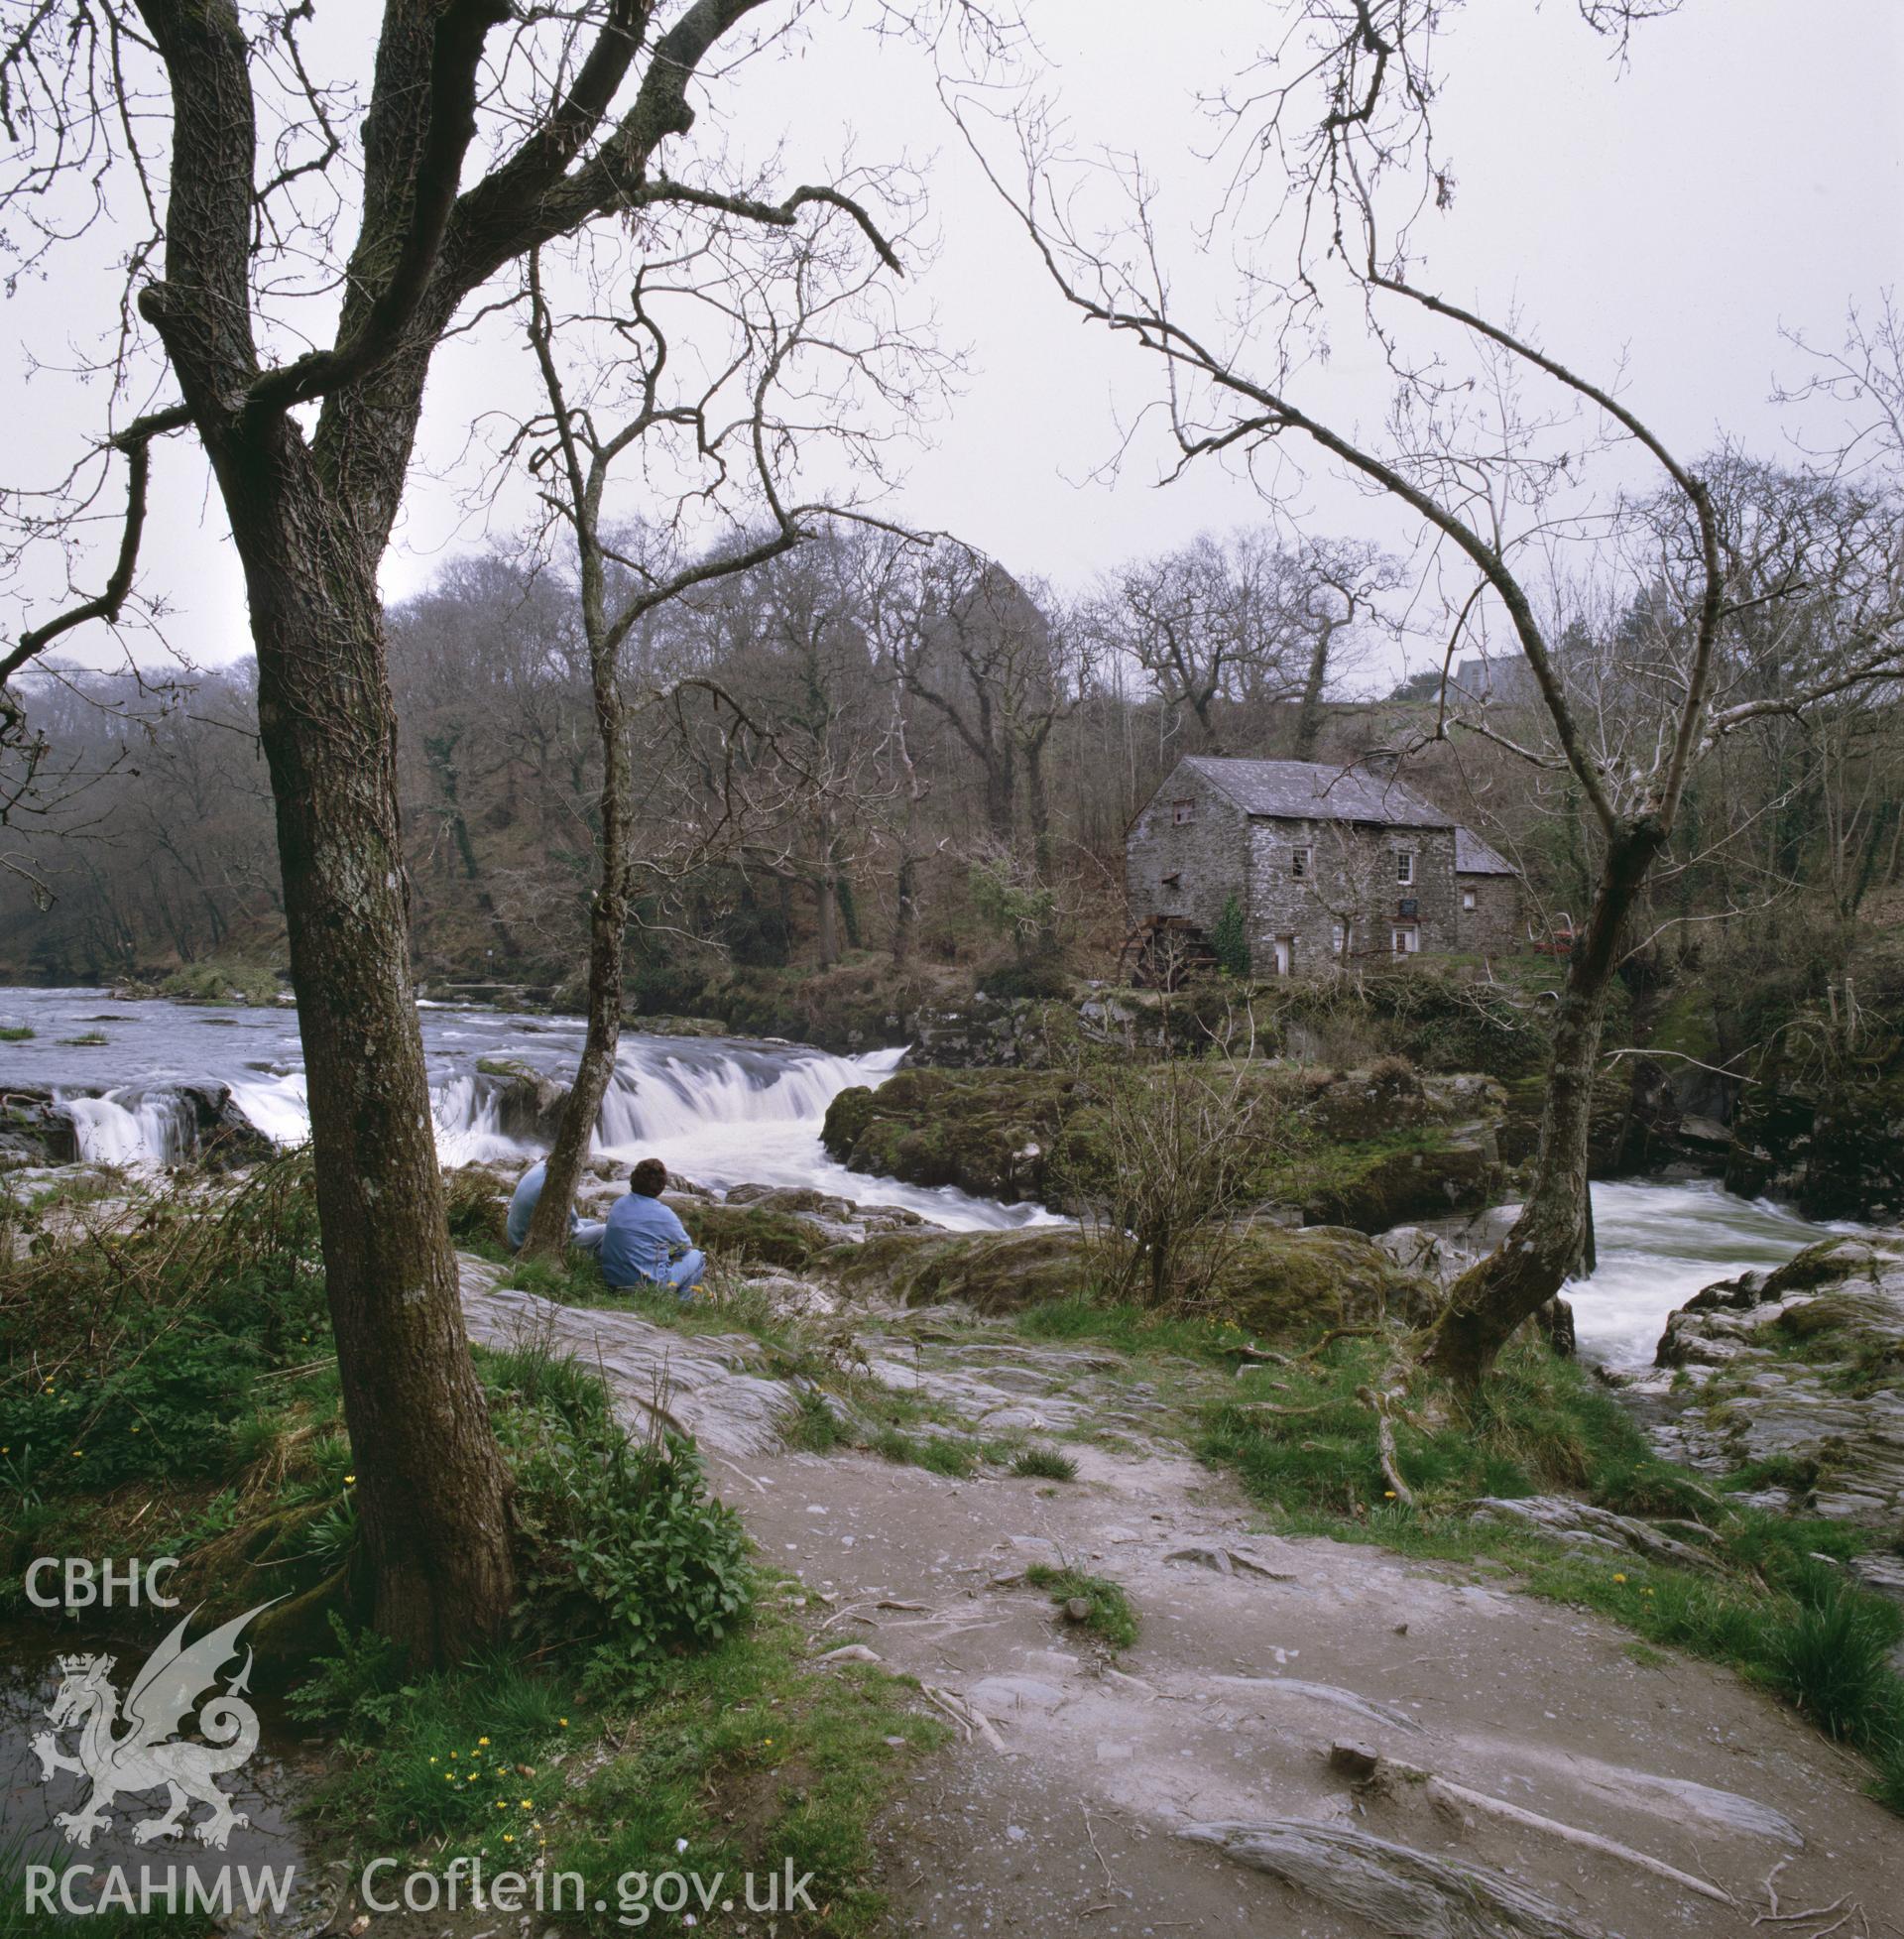 RCAHMW colour transparency showing view of Cenarth Mill, taken by RCAHMW, circa 1986